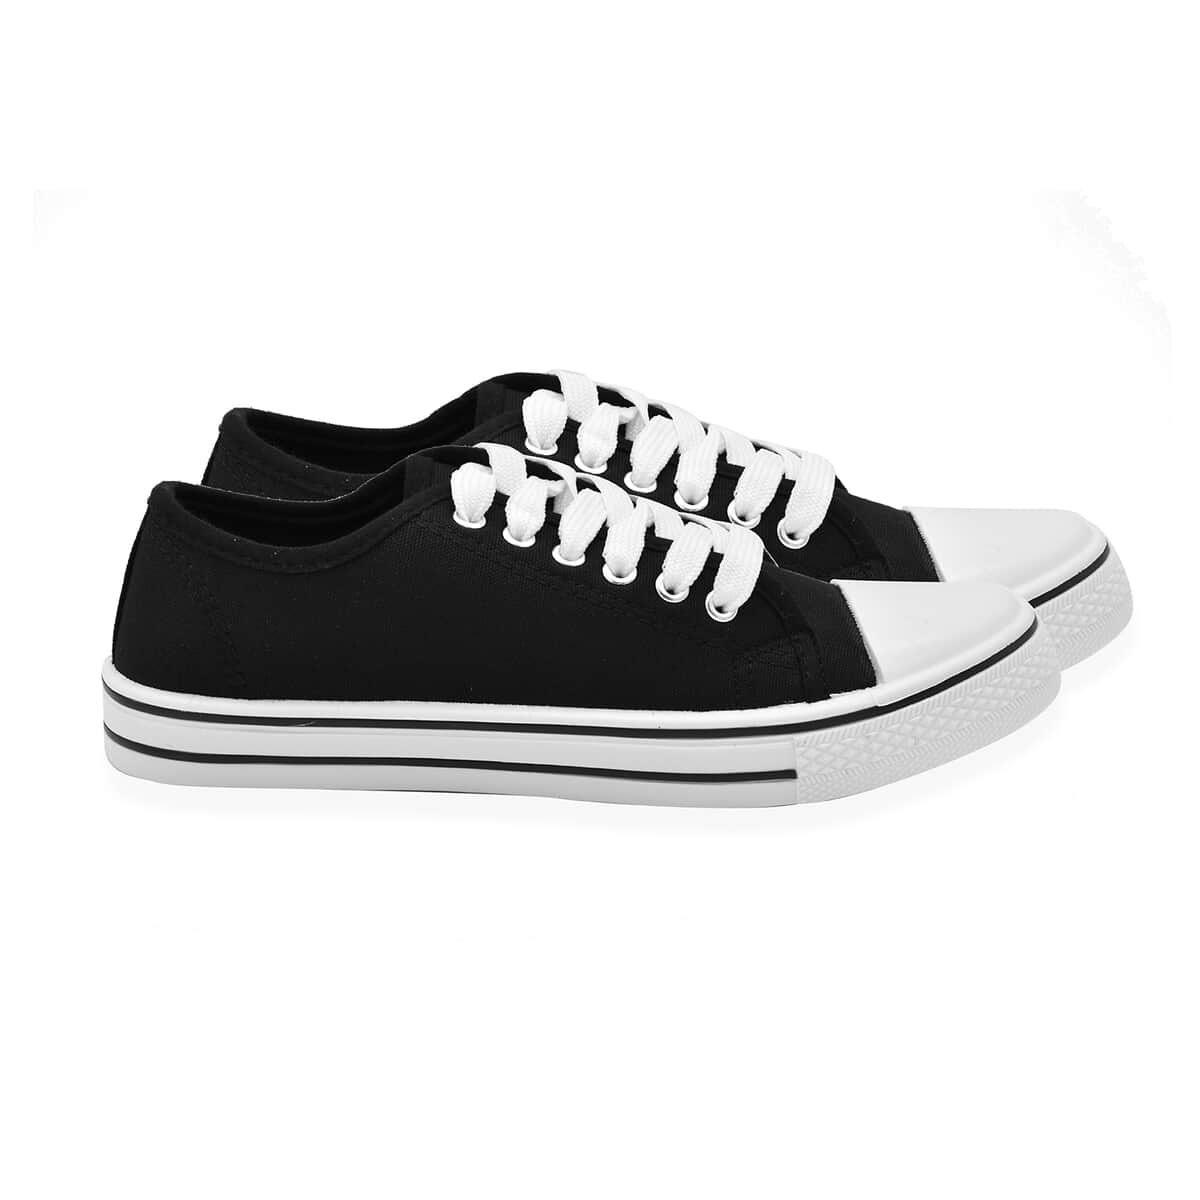 Black Star Canvas Lace Up Shoes - Size 5 (US) image number 2